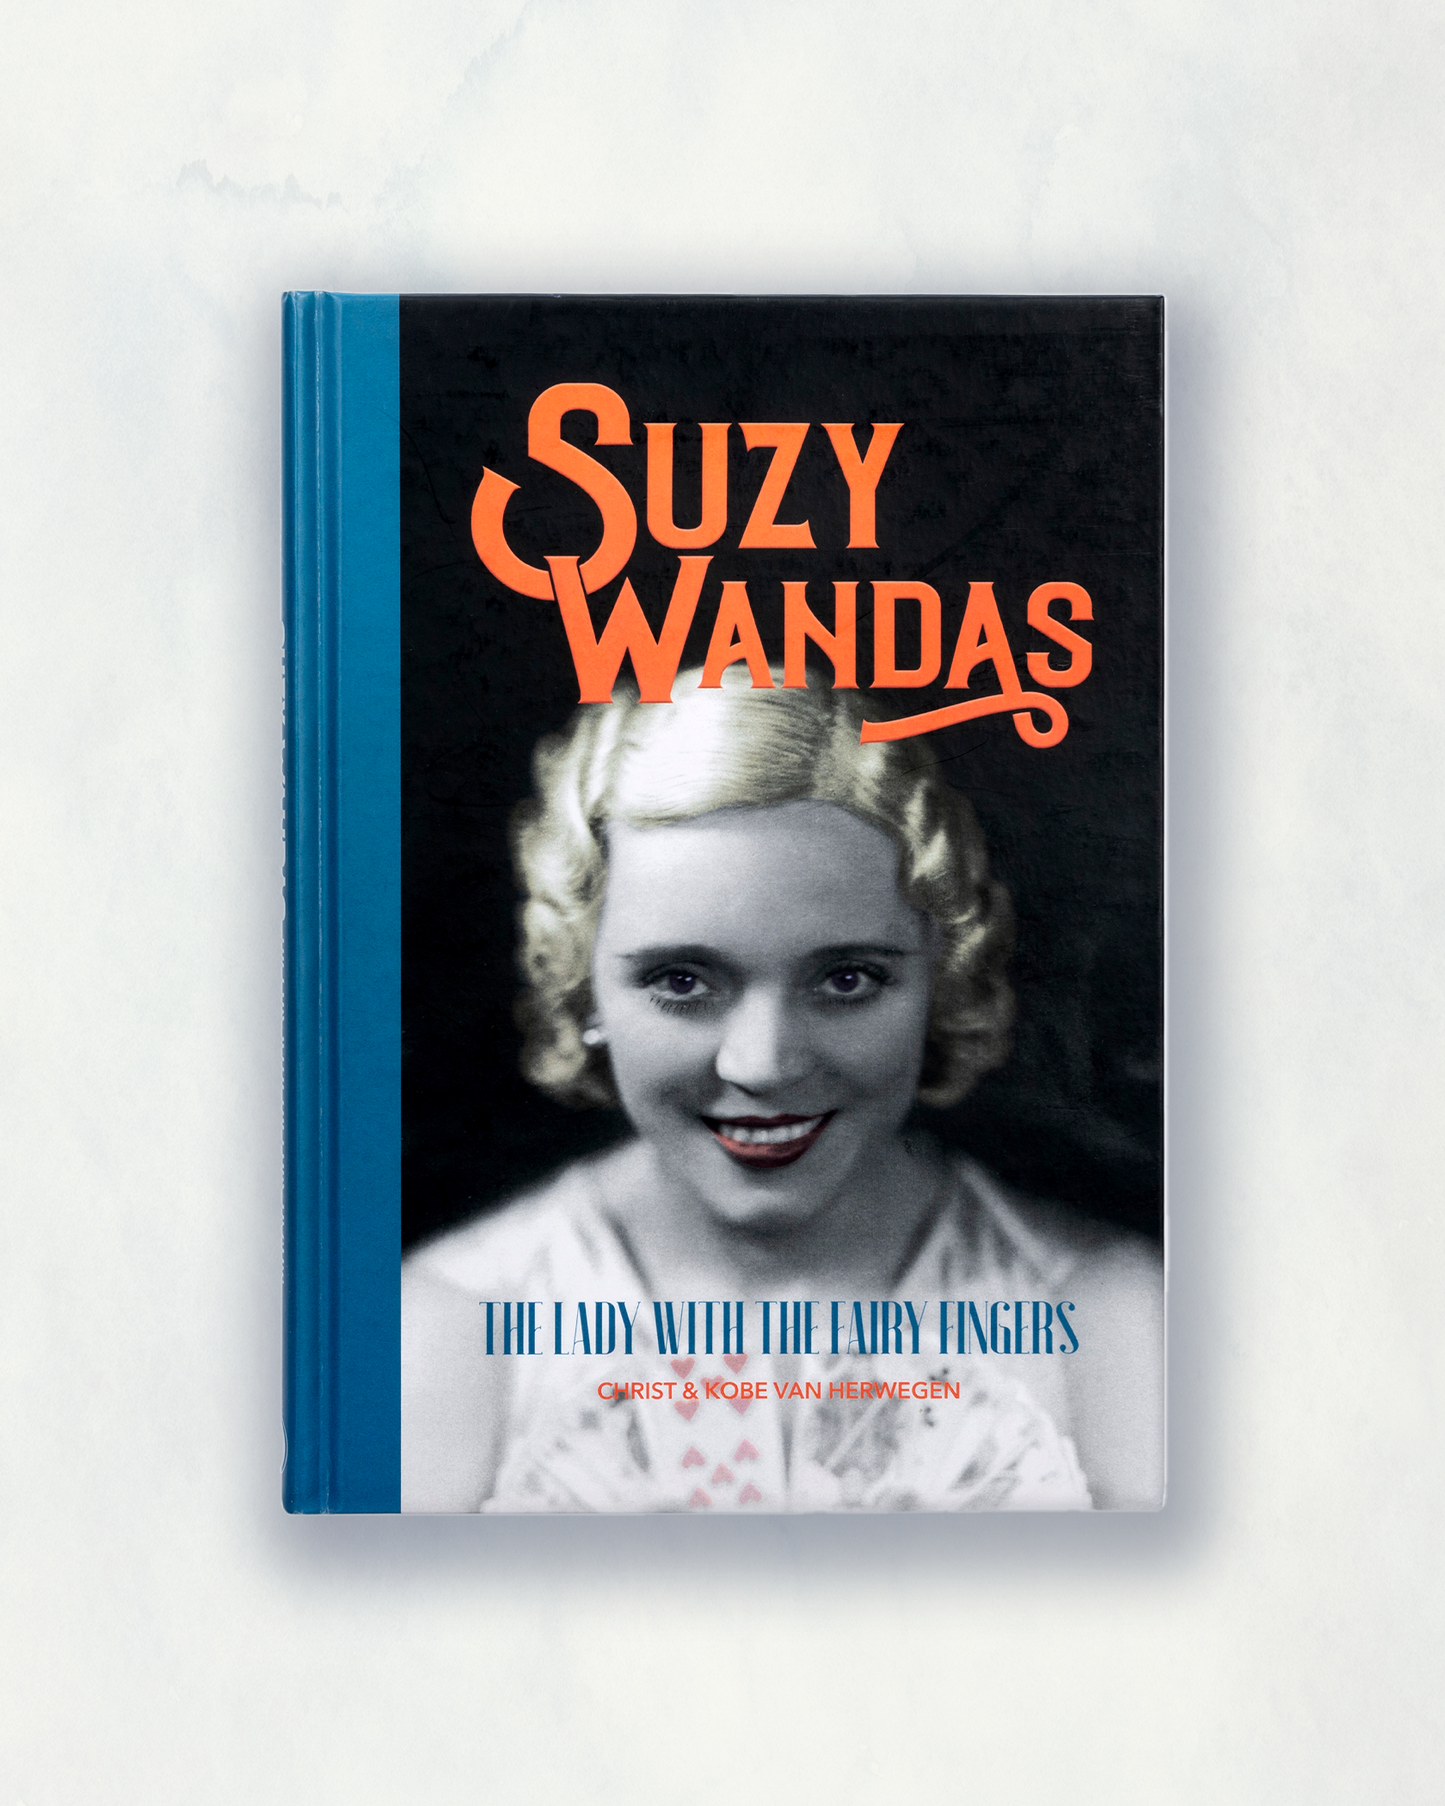 Suzy Wandas: The Lady with the Fairy Fingers